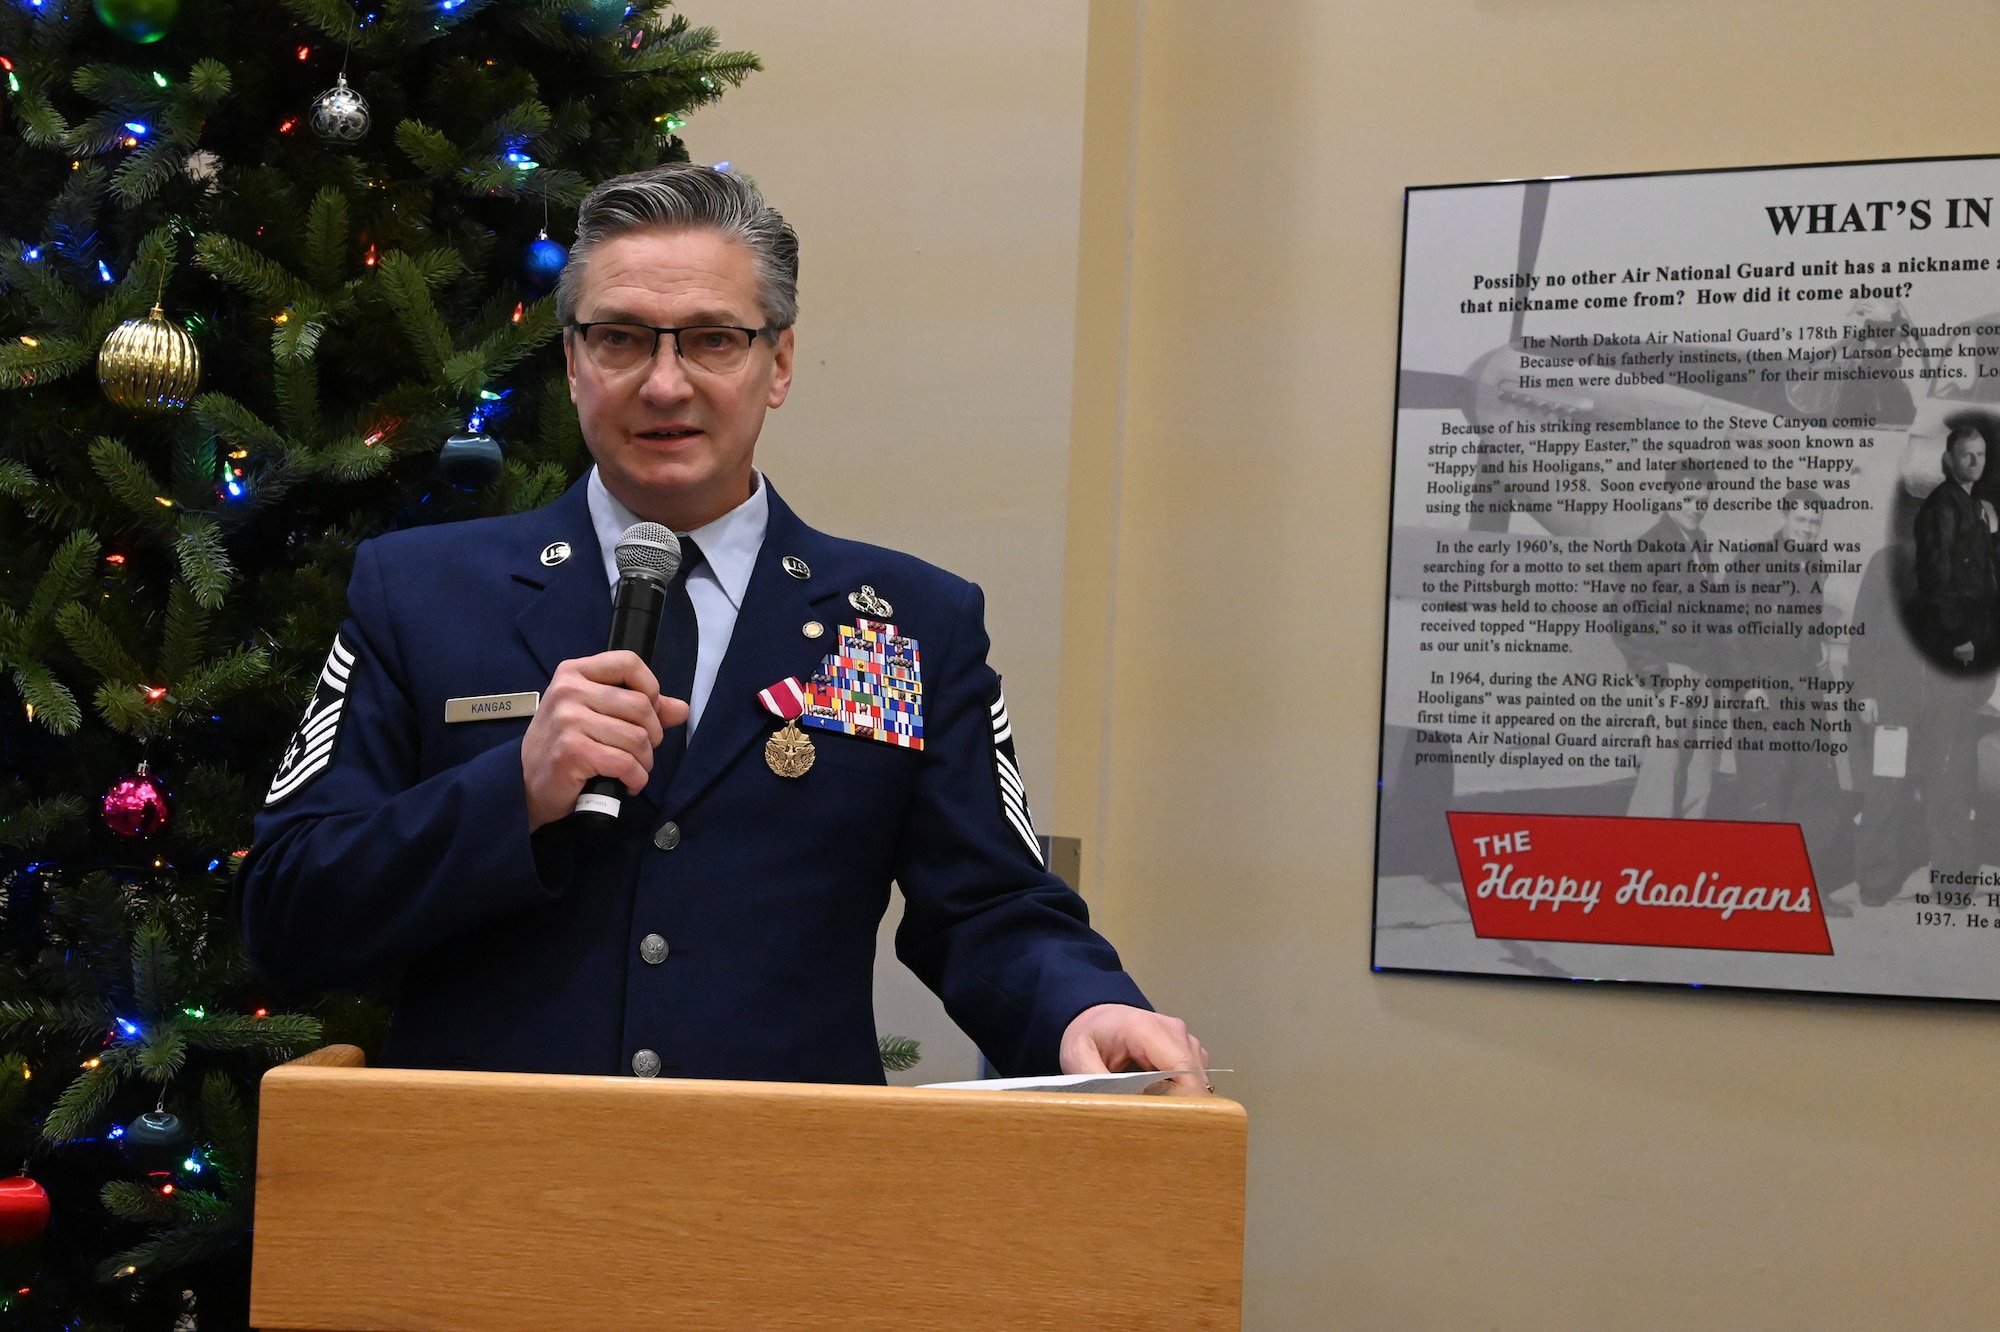 Chief Master Sgt. Duane Kangas stands at a podium and speaks to an audience using a microphone during his retirement ceremony at the North Dakota Air National Guard Base, Fargo, N.D., Dec. 4, 2021.